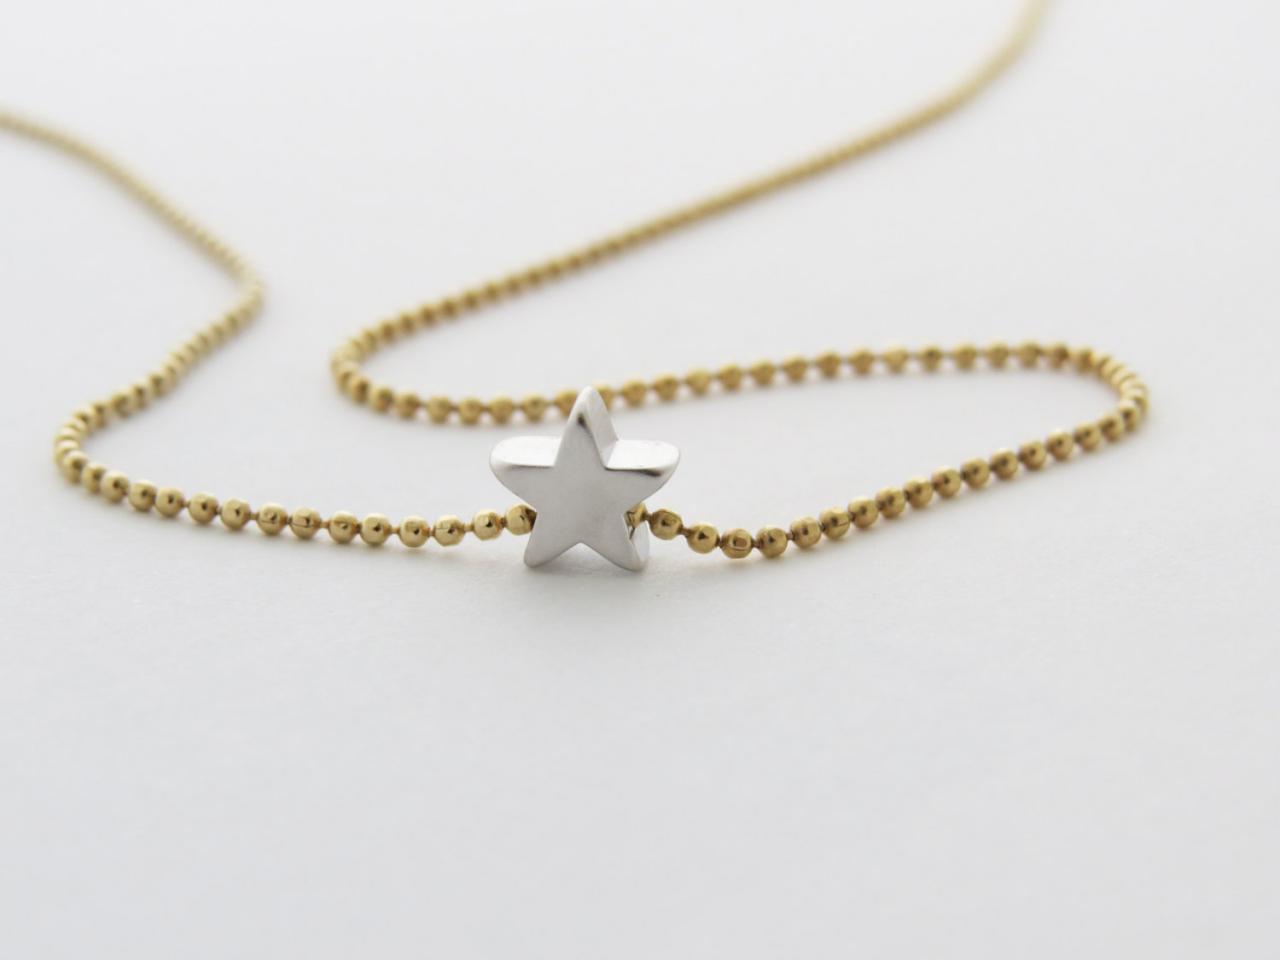 Gold Necklace - Silver Star Necklace - Silver Pendant - Little Dainty Necklace - Simple Gold Necklace, Everyday Gold Jewelry